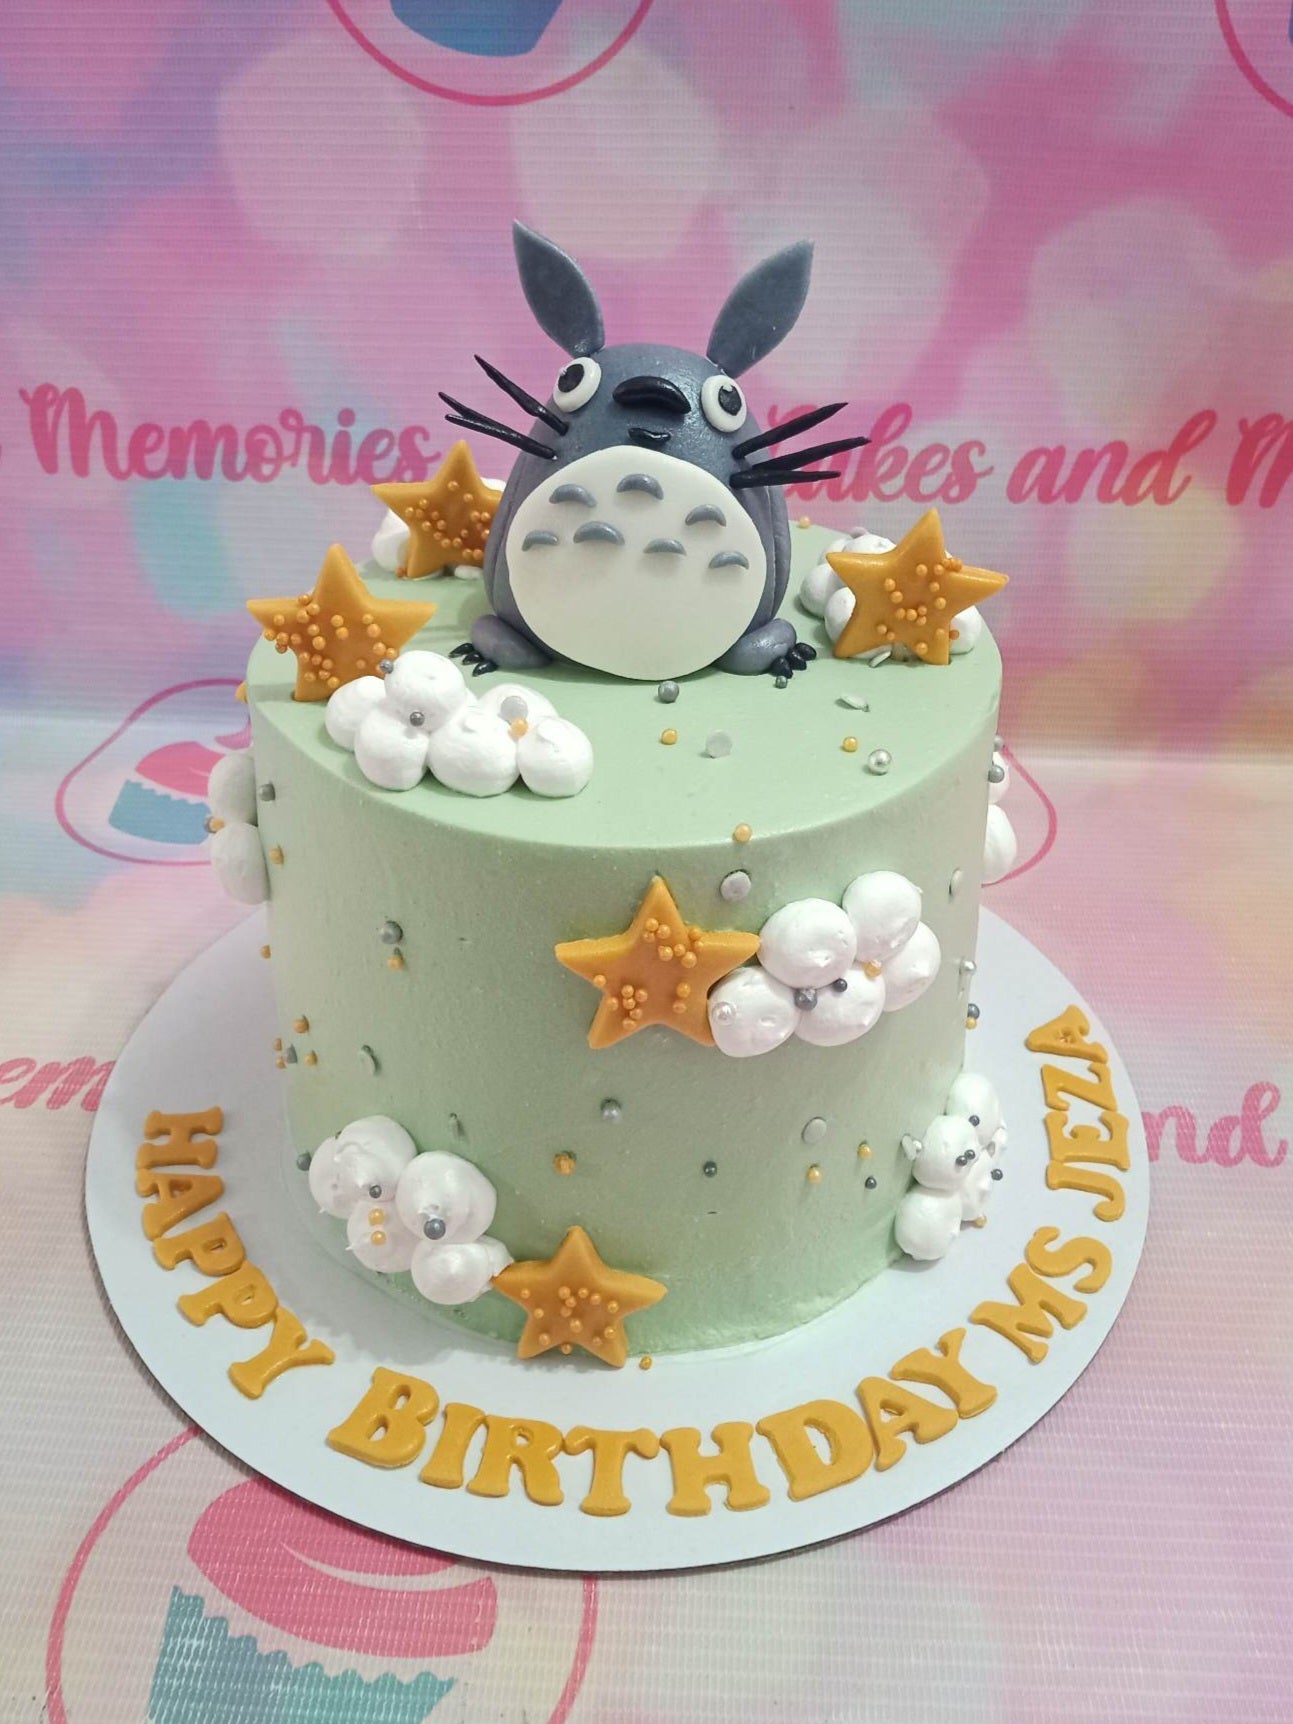 storybook

This Totoro Cake is a delightful treat to the eyes! Made with high quality ingredients and meticulous attention to detail, this Ghibli-inspired cake is sure to be the star of any storybook-themed event. Enjoy the beloved character of My Neighbor Totoro in delicious cake form!